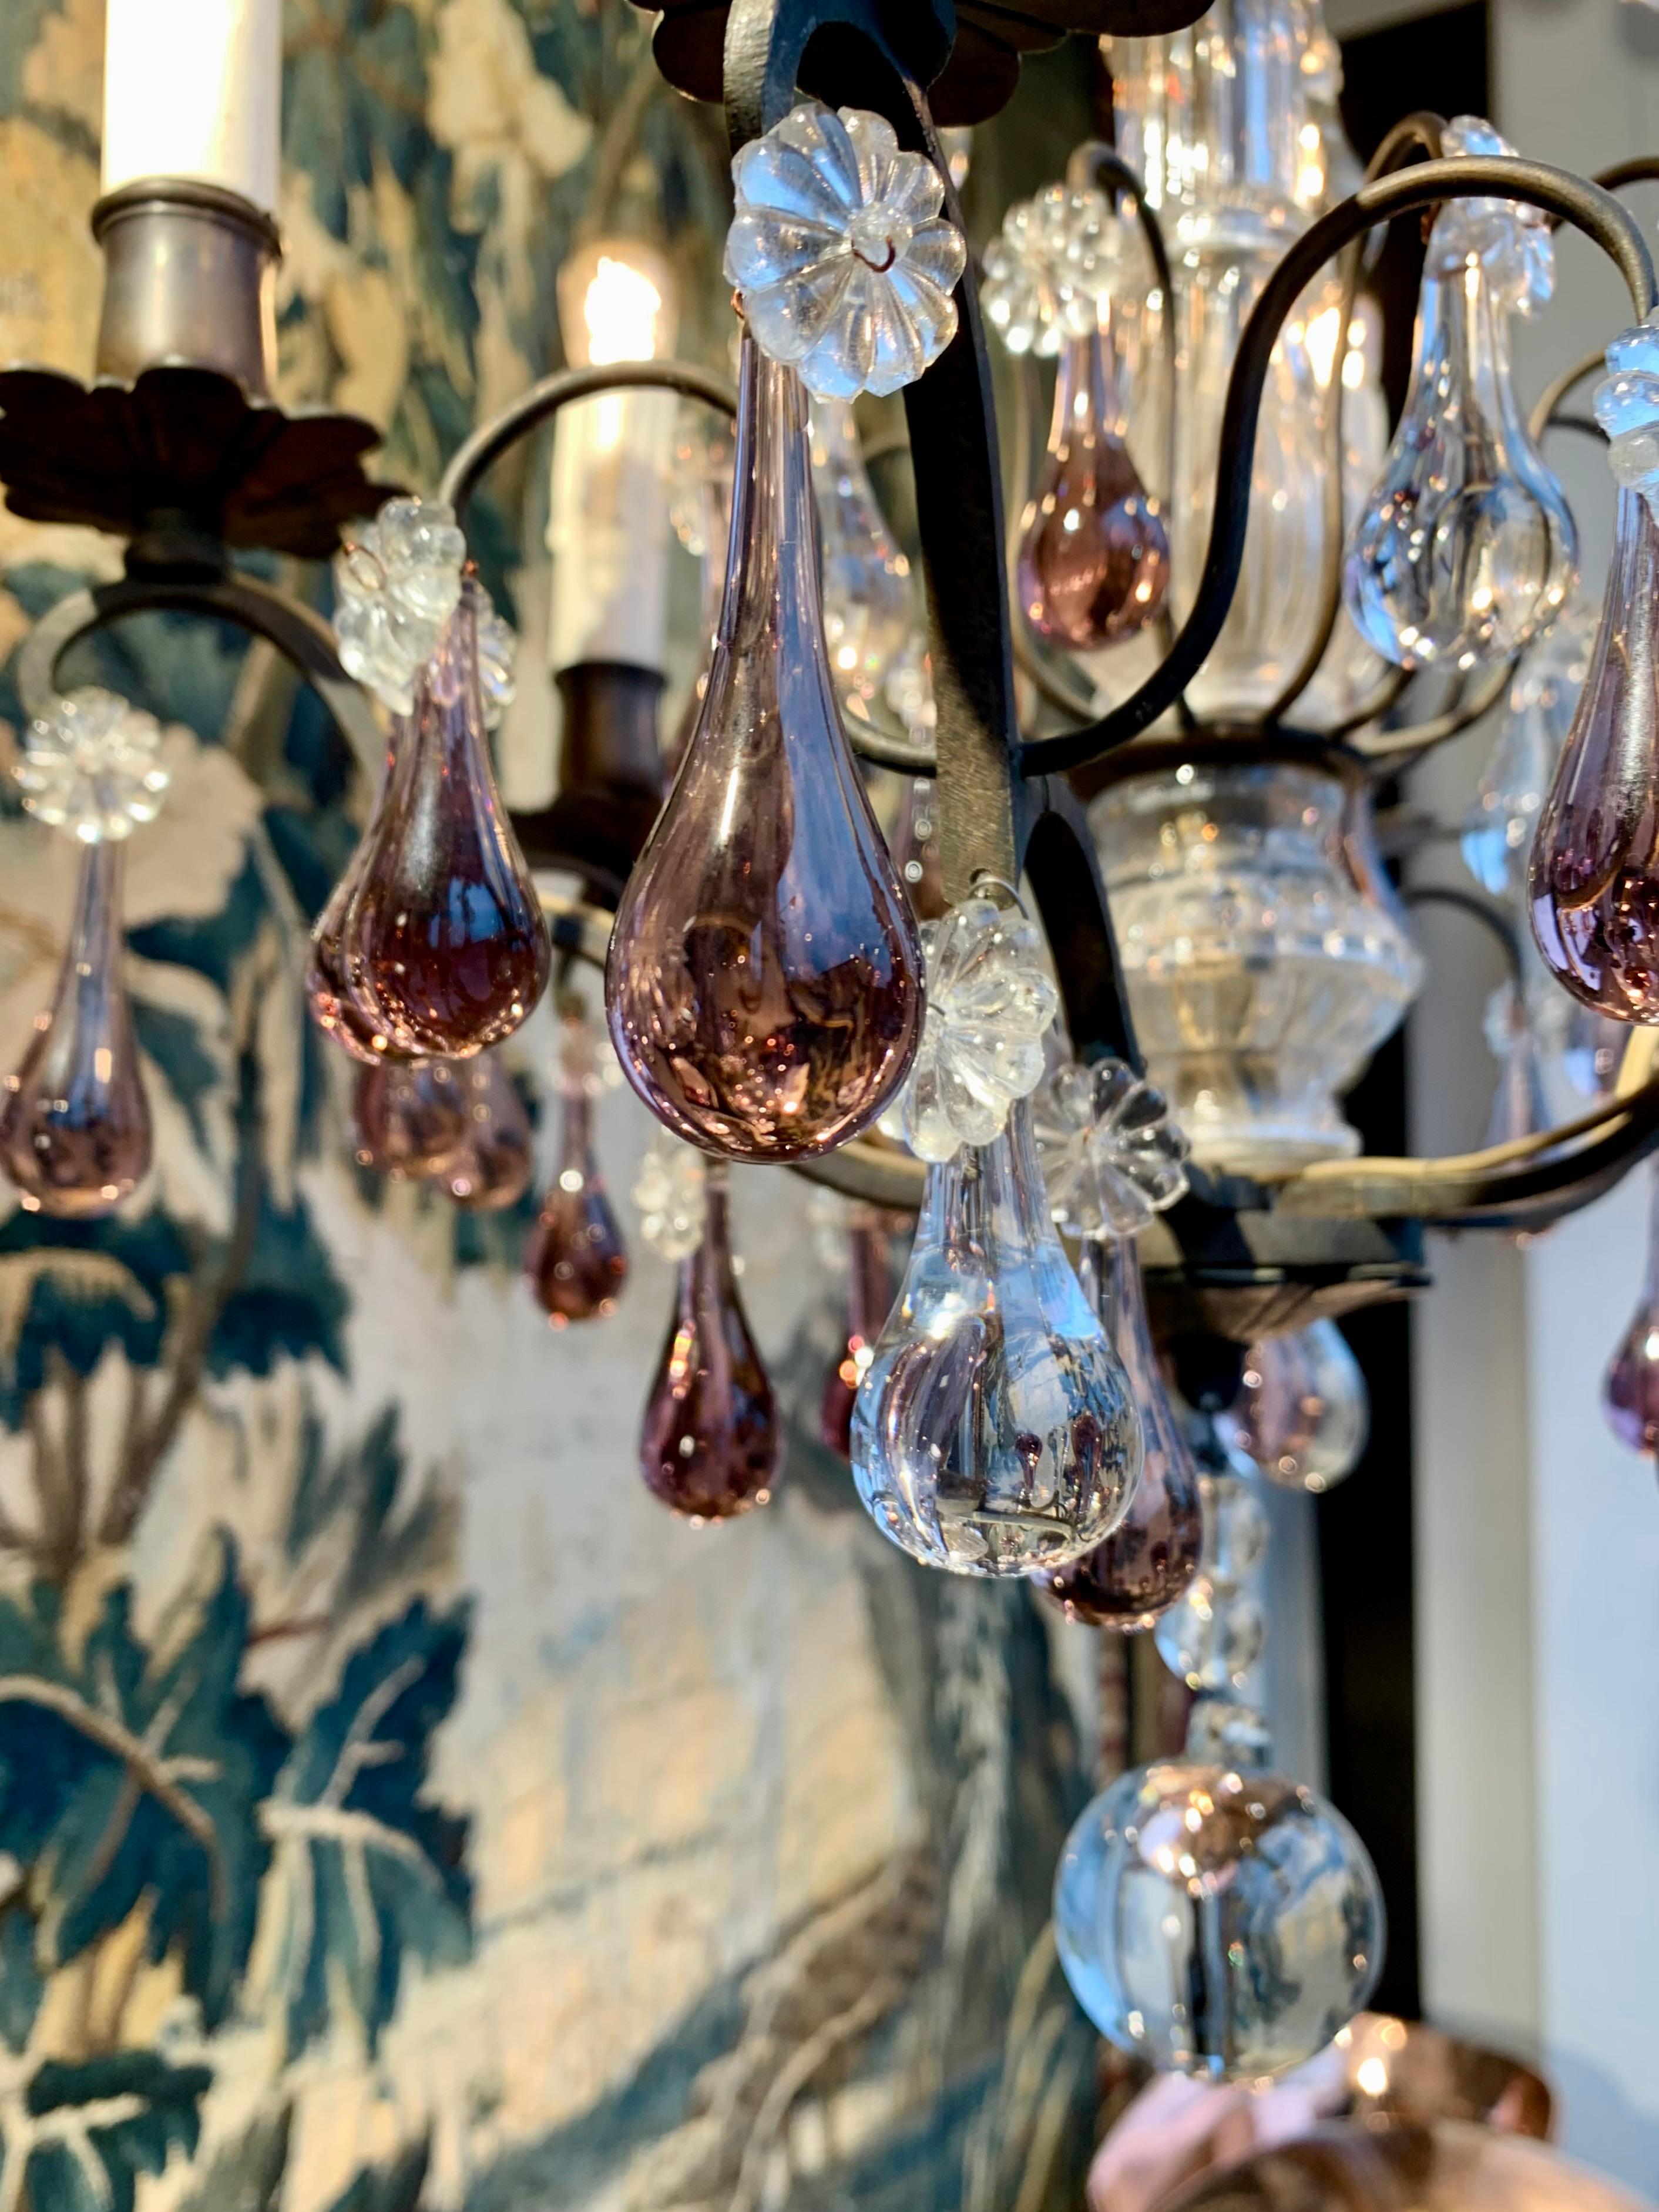 Antique French sweet chandelier with drop prisms in clear and purple glass. The chandelier gives a somewhat 